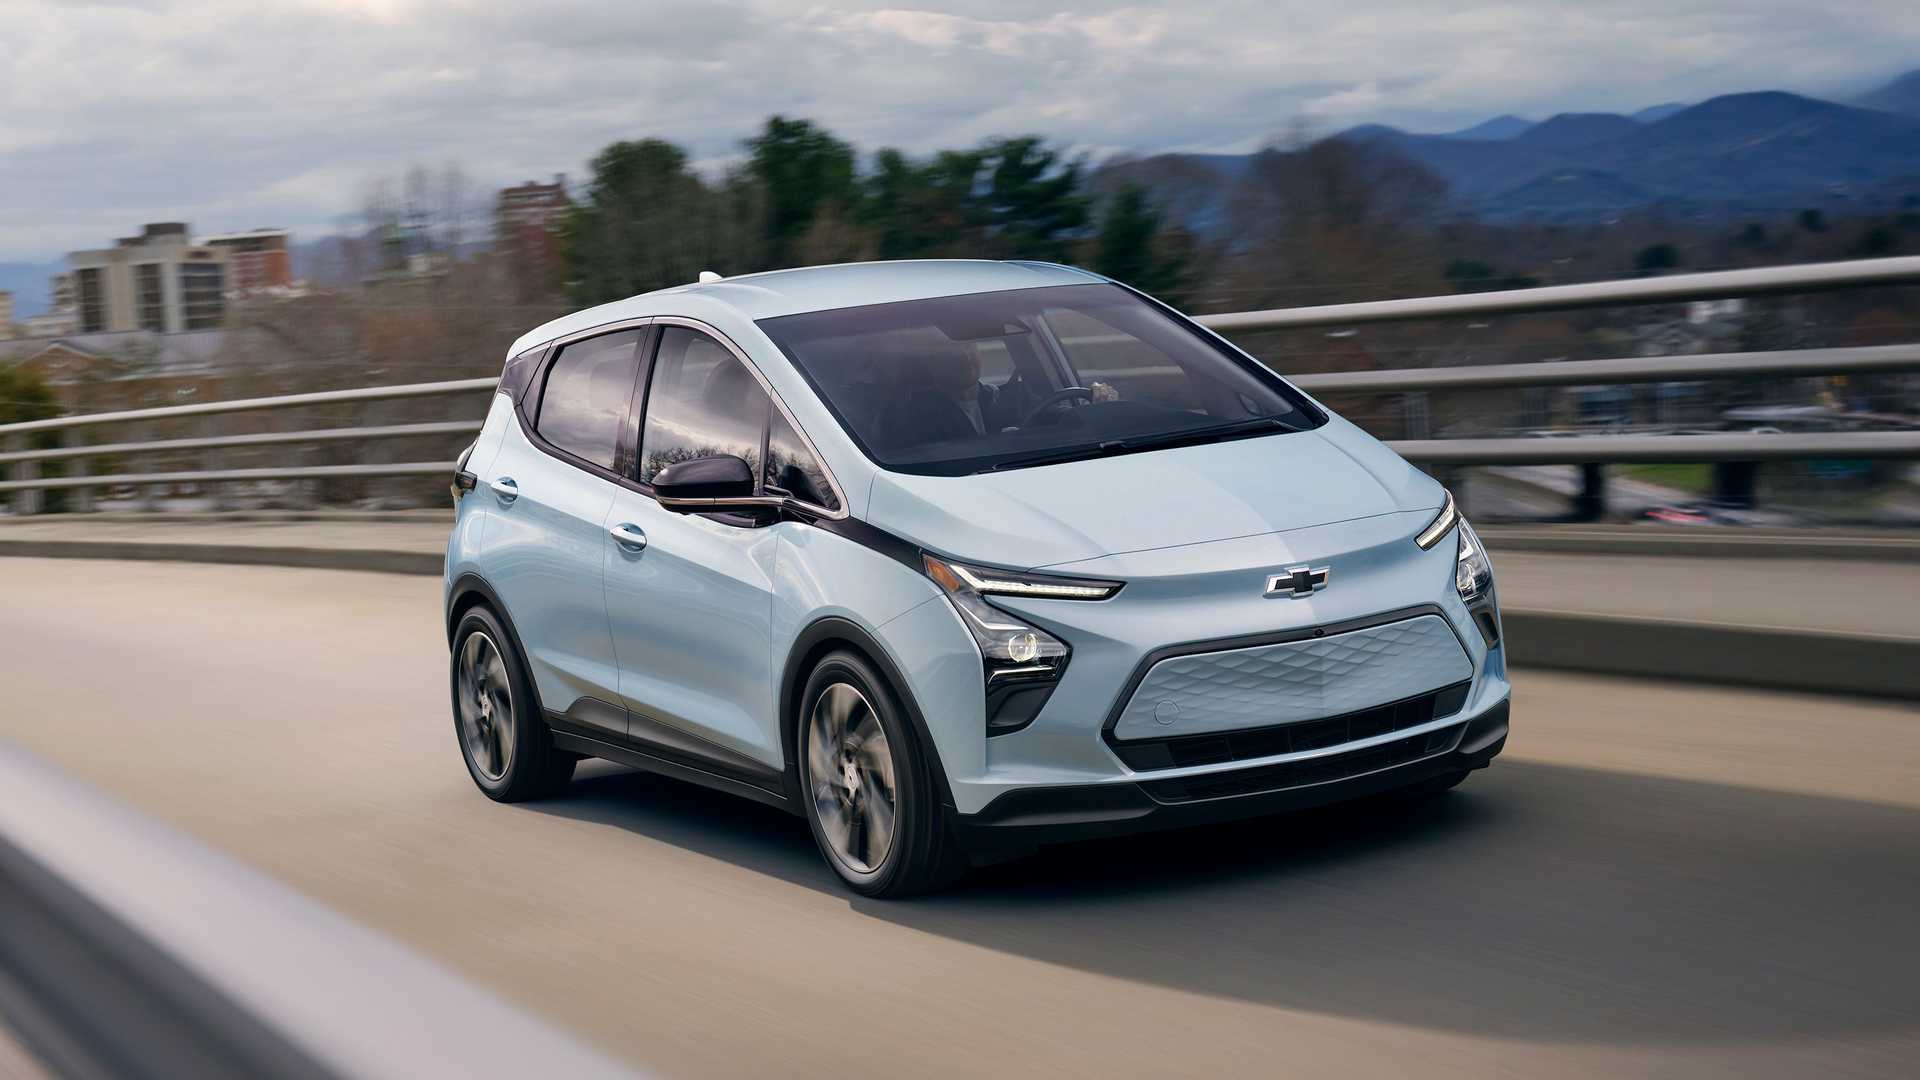 GM To Take Final Chevrolet Bolt EV/EUV Orders In August